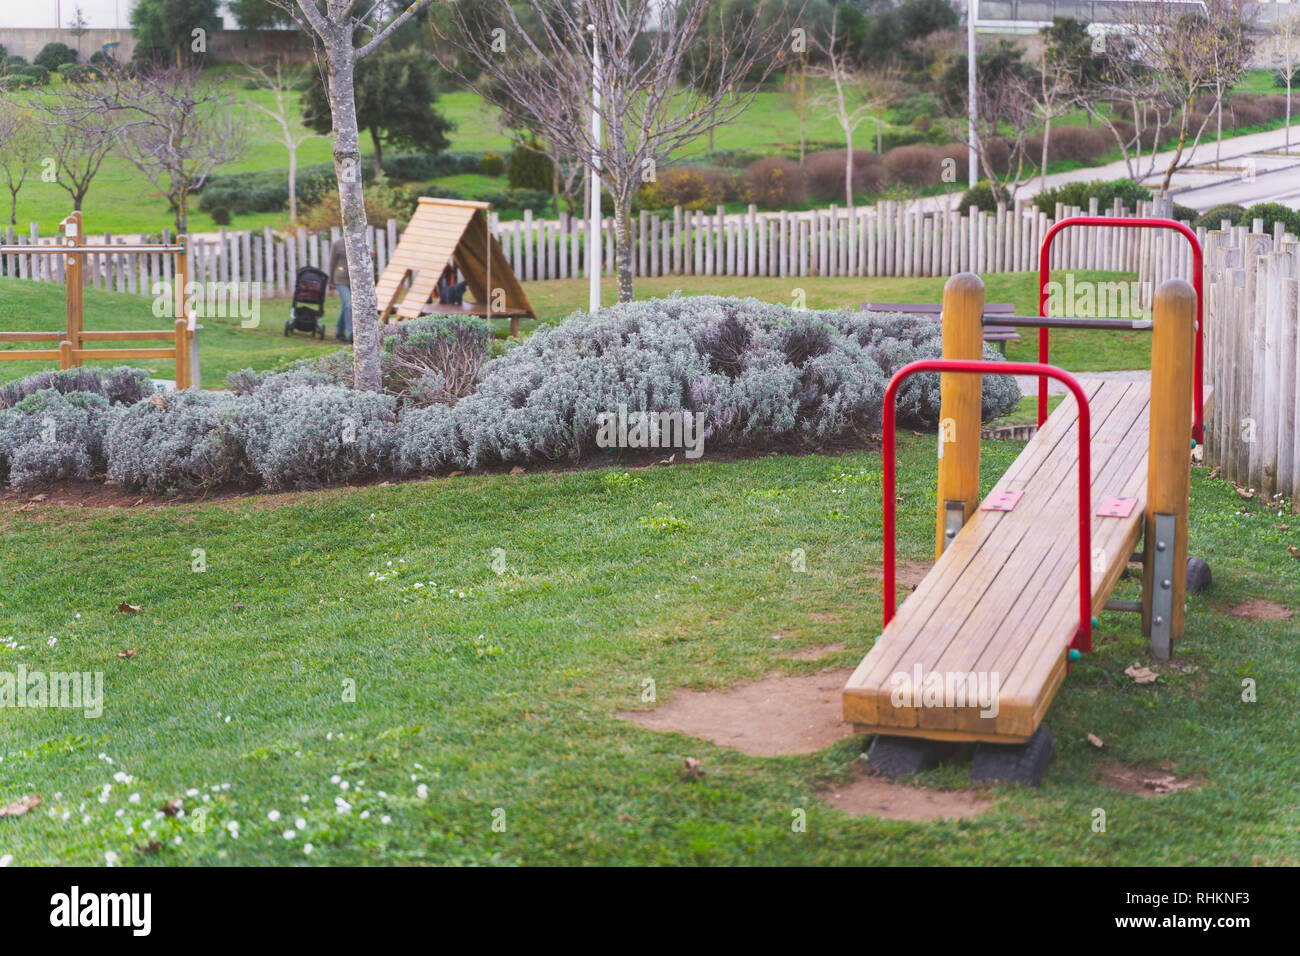 Seesaw, Red wooden kids playground equipment in a park with green grass, bushes, trees, and a wooden fence, Oeiras Portugal Stock Photo